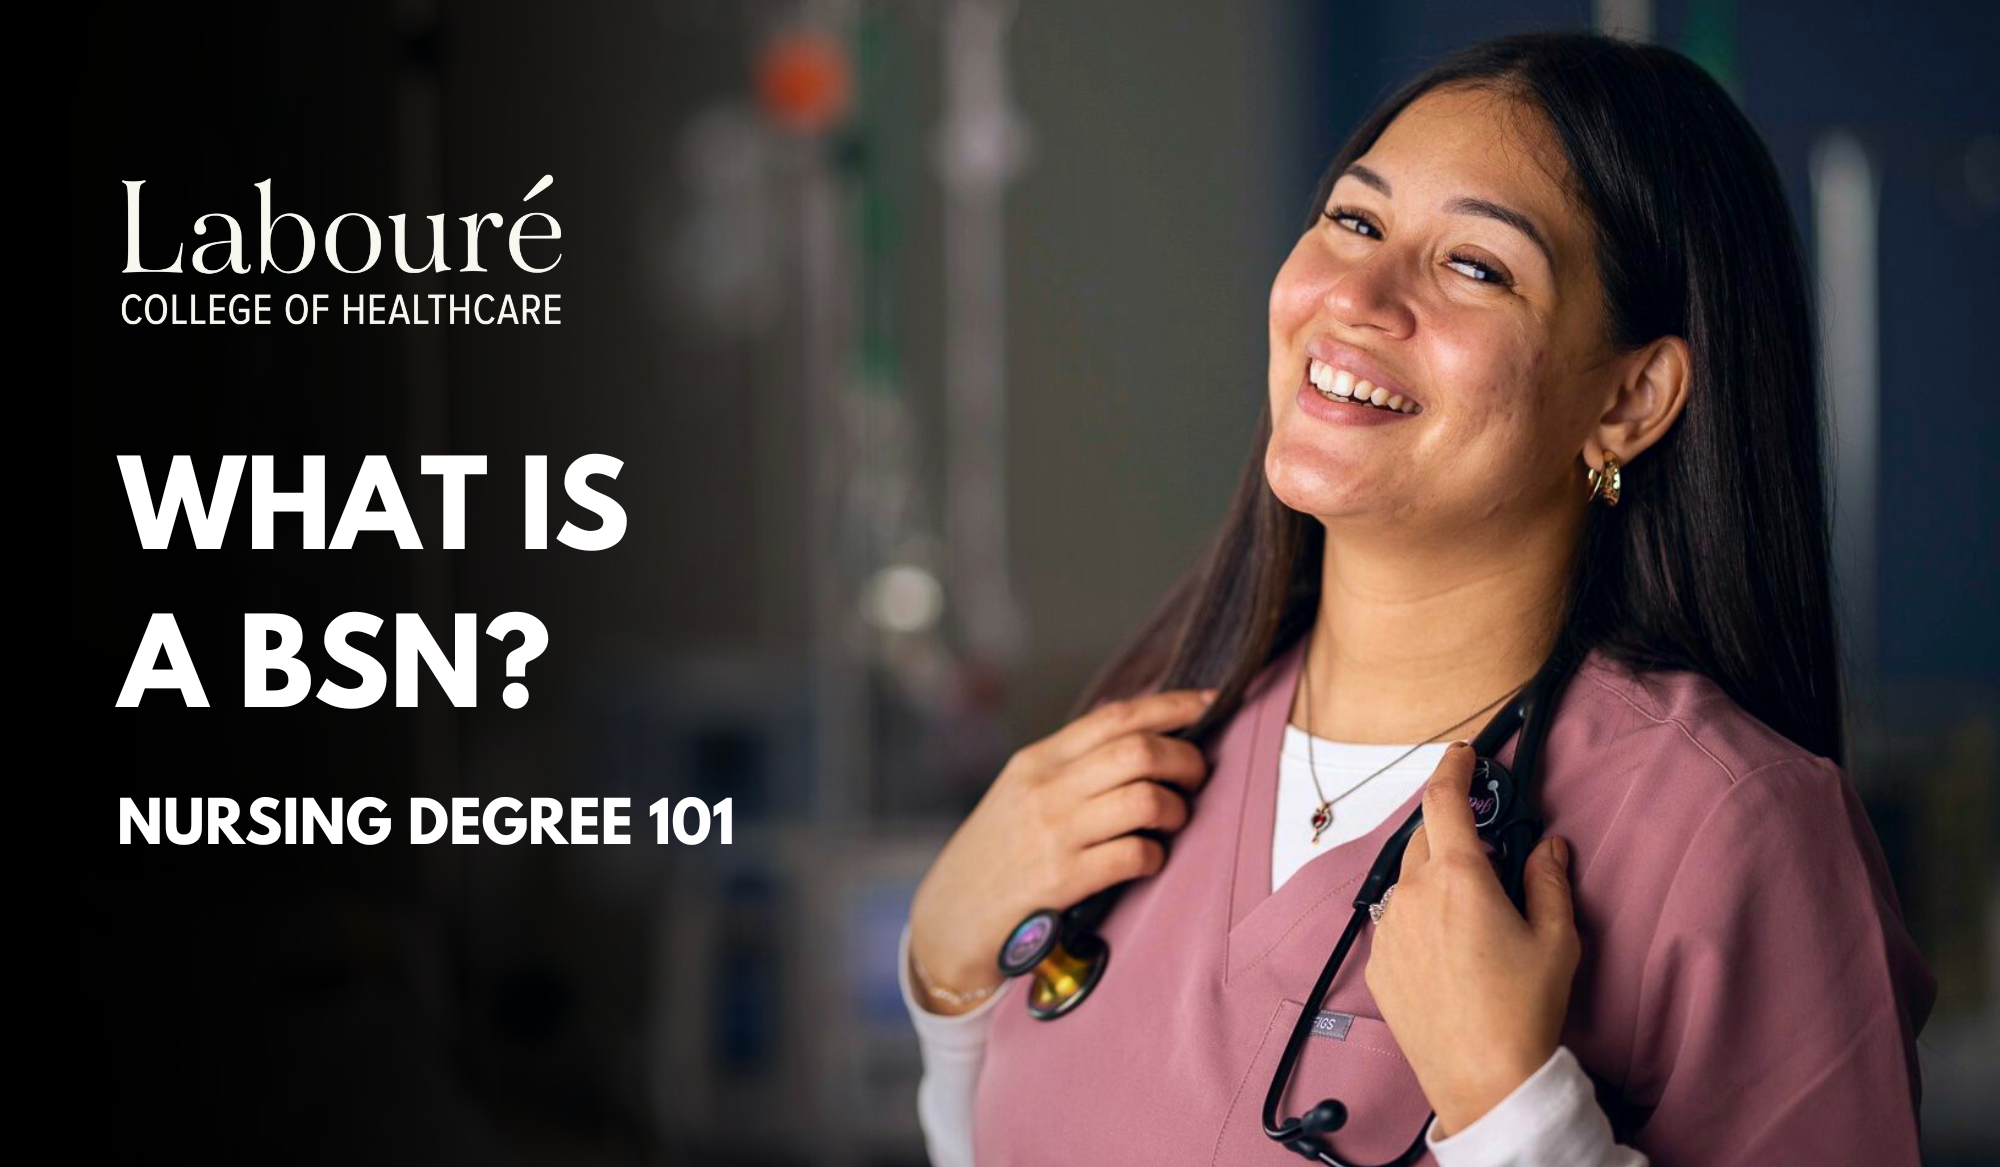 What is a BSN? | Nursing Degree 101